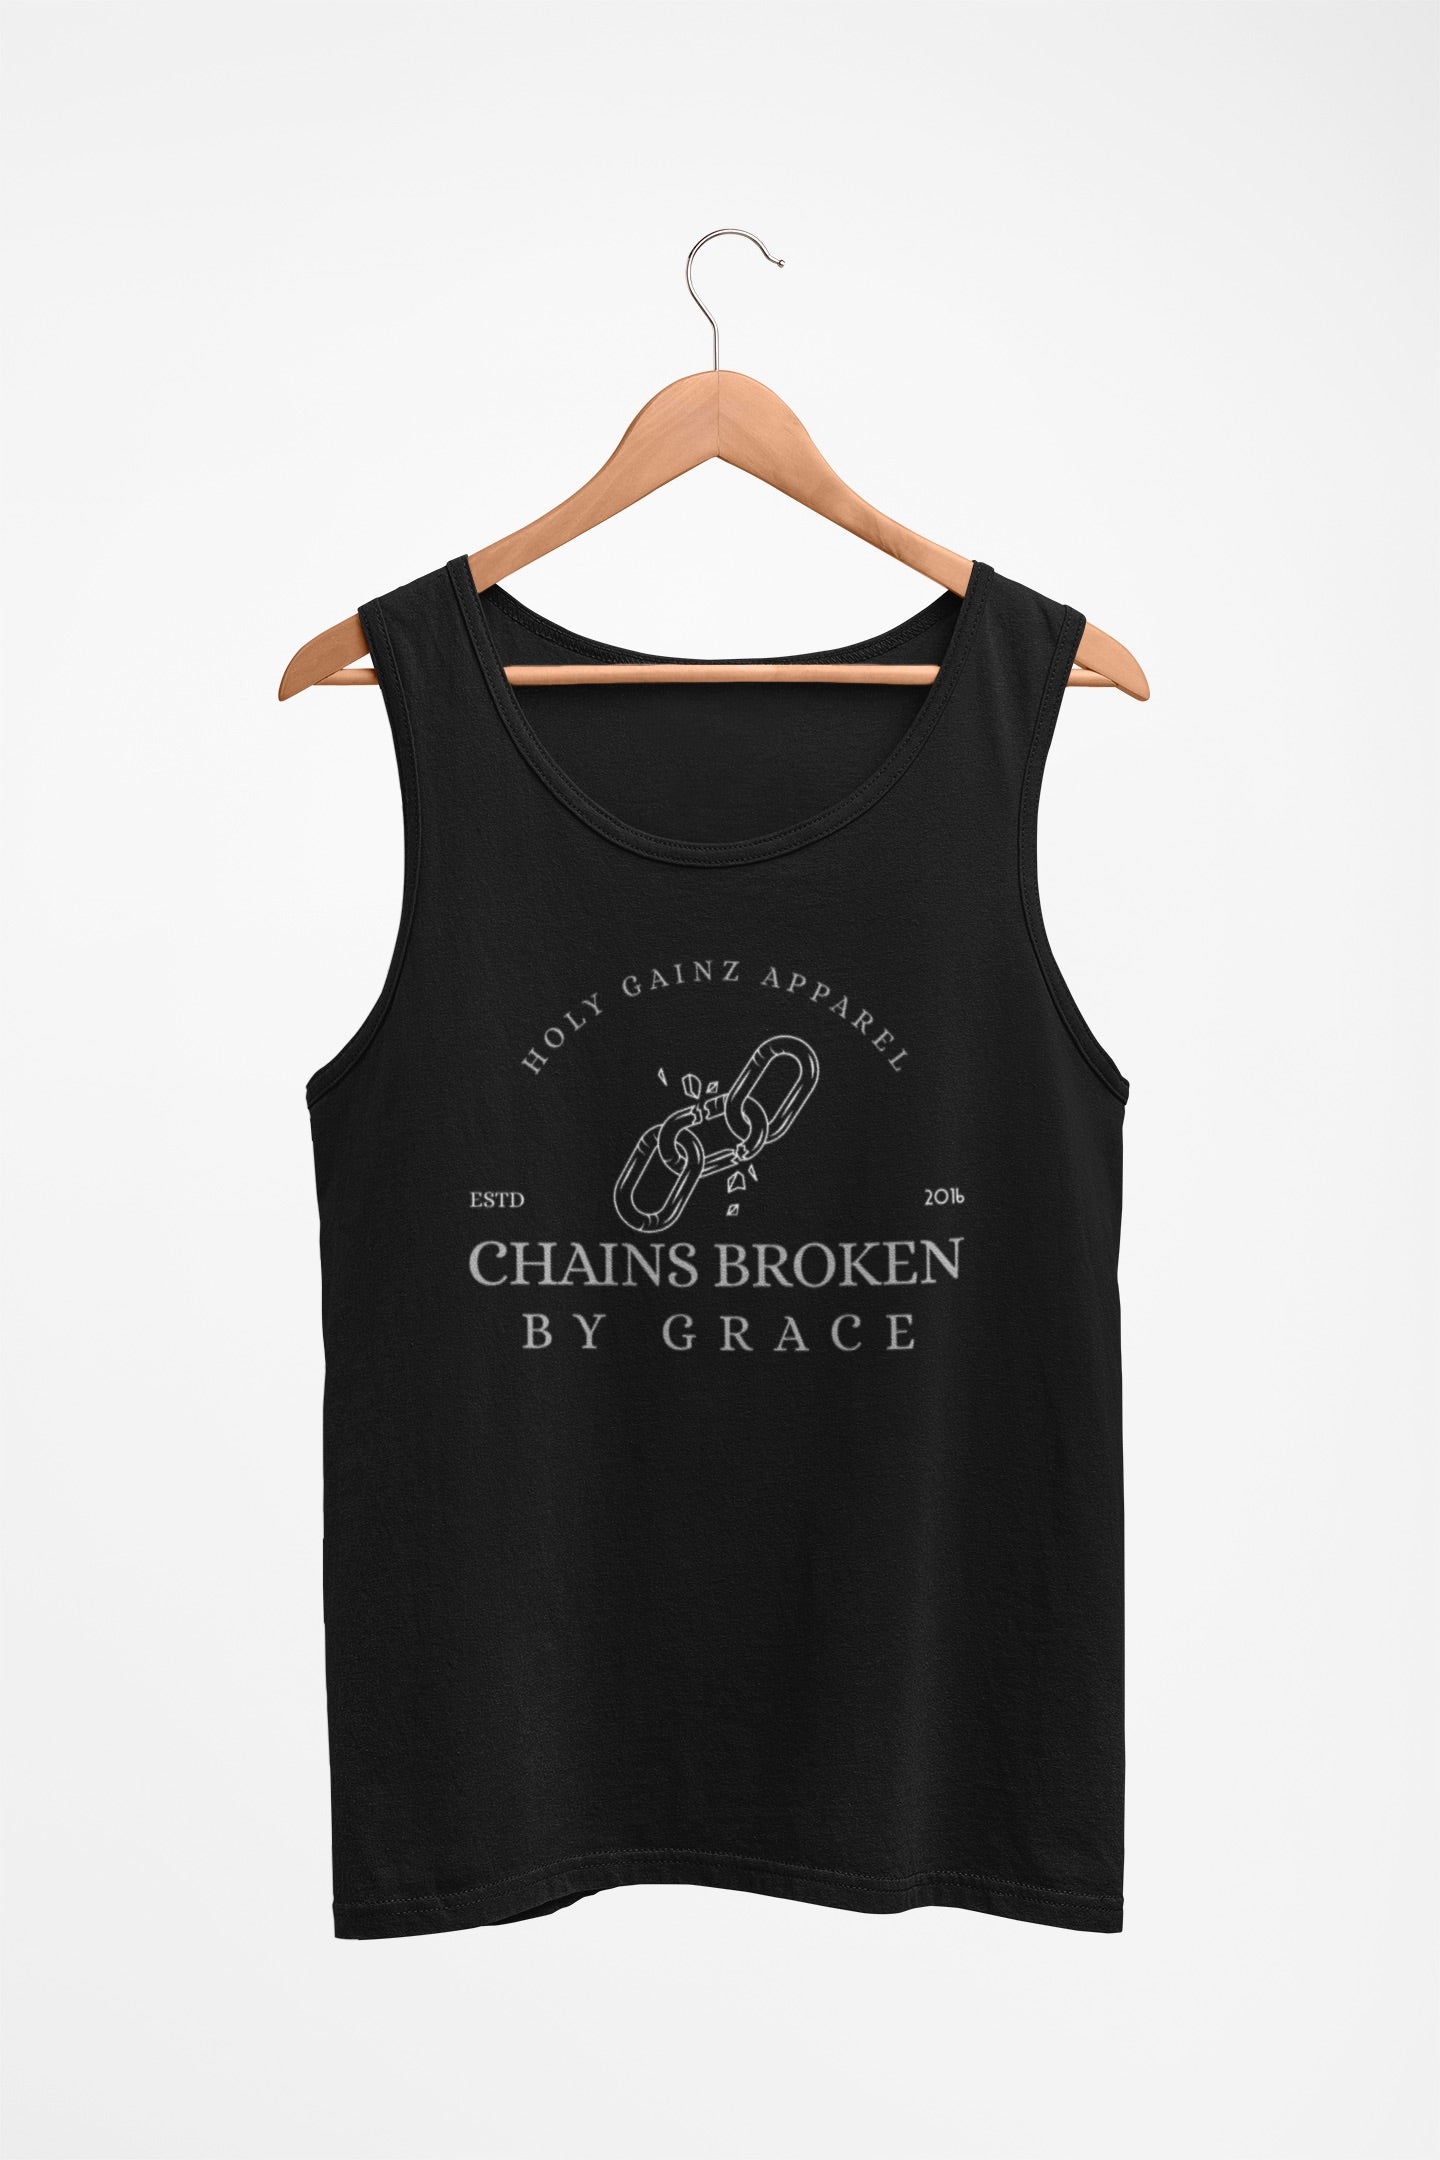 (LAST CHANCE) Holy Gainz Apparel Chains Broken By Grace Unisex Tank Top